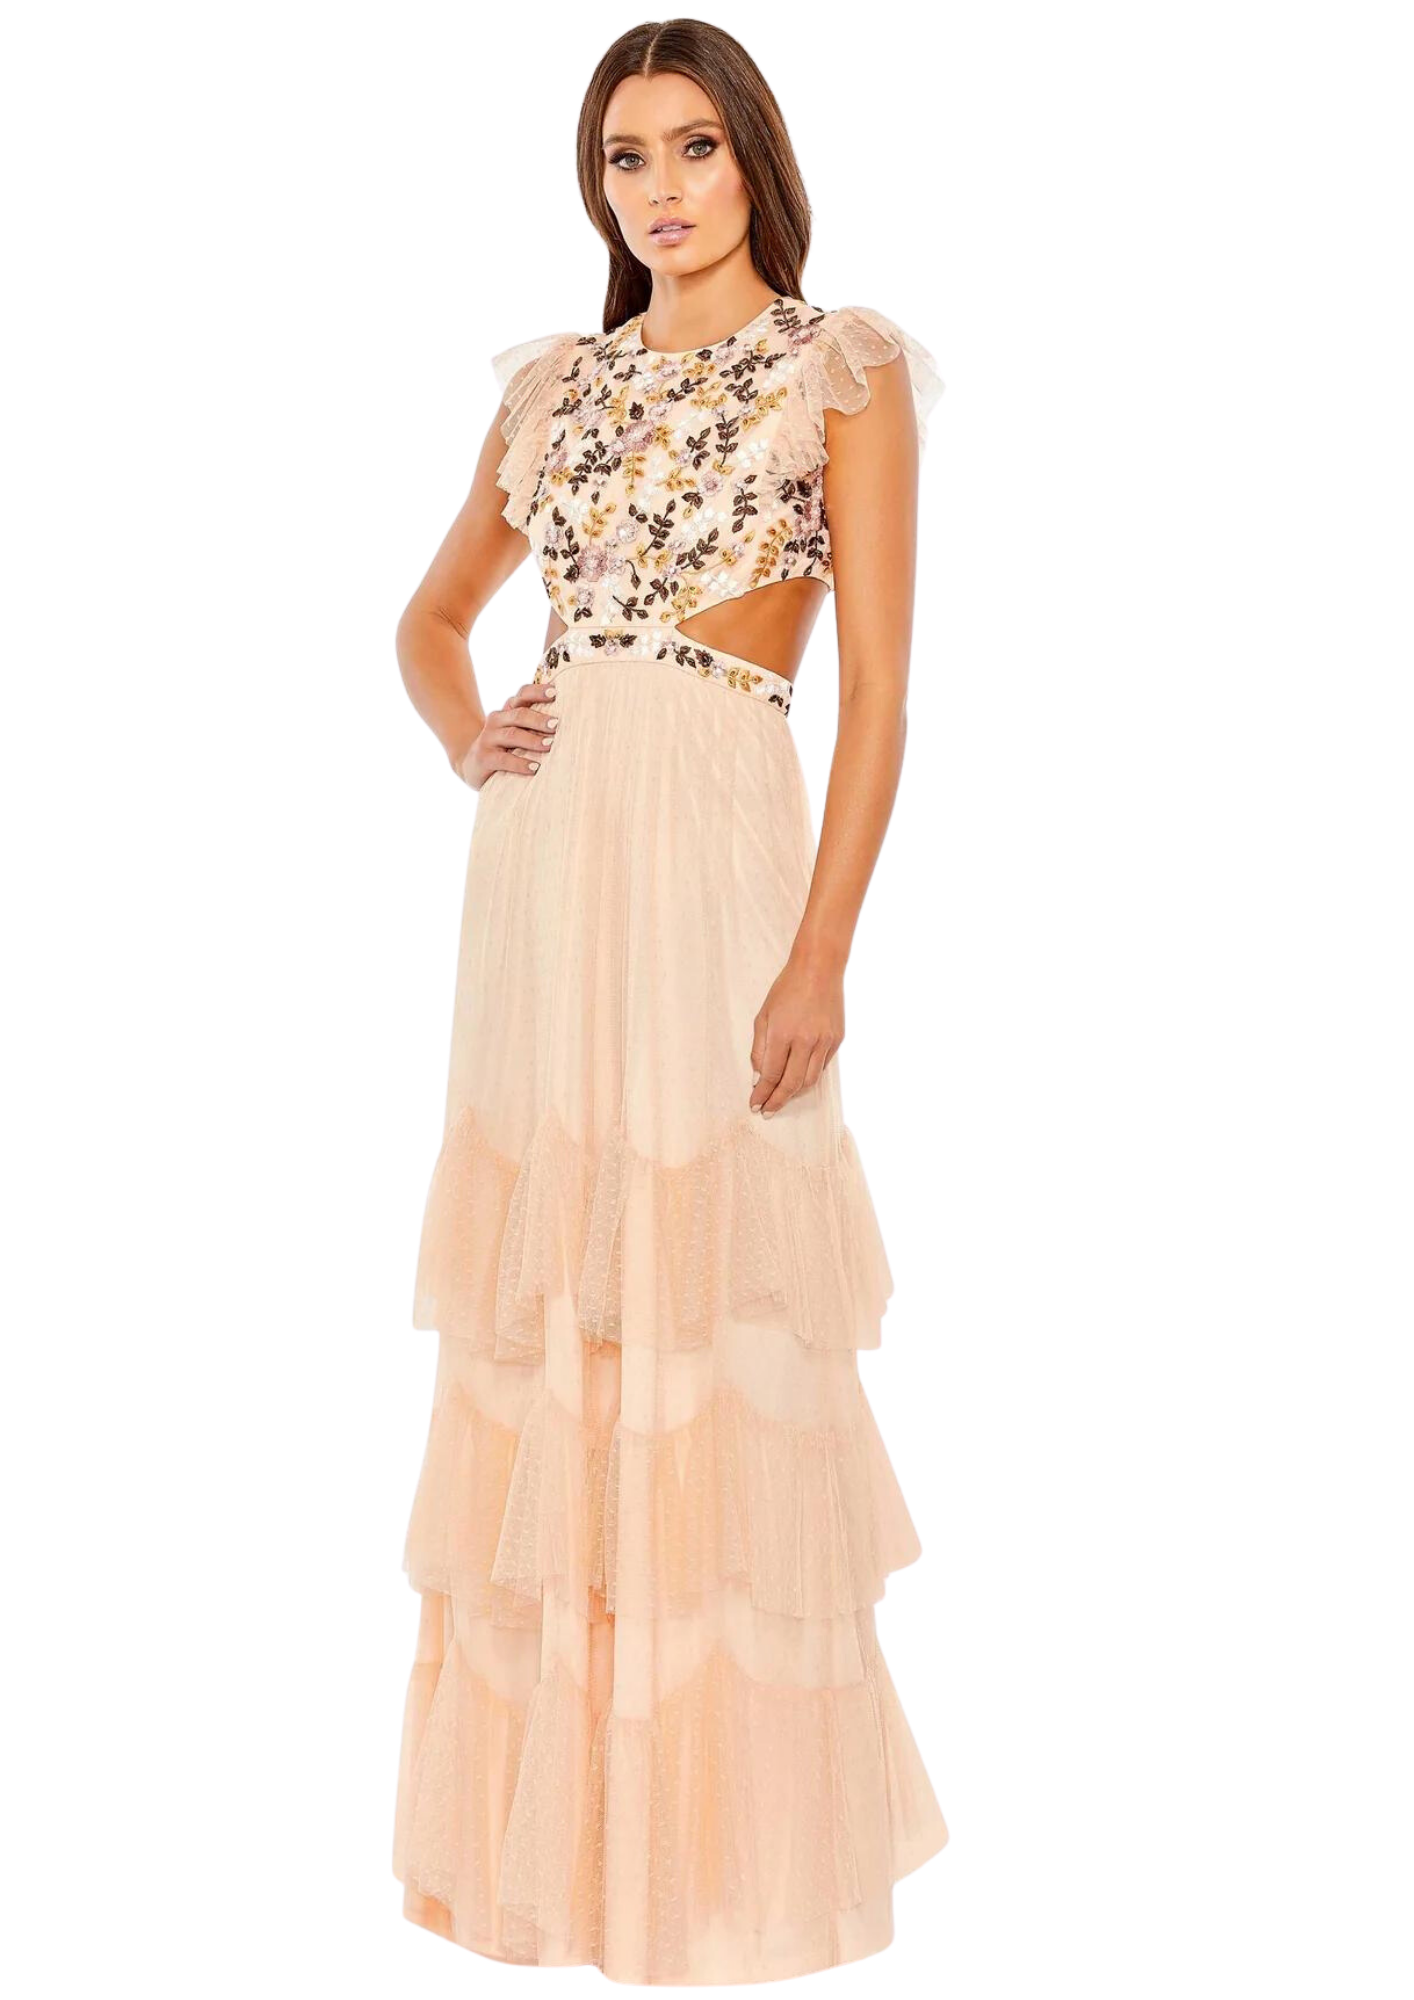 Molly Gown - Apricot Floral